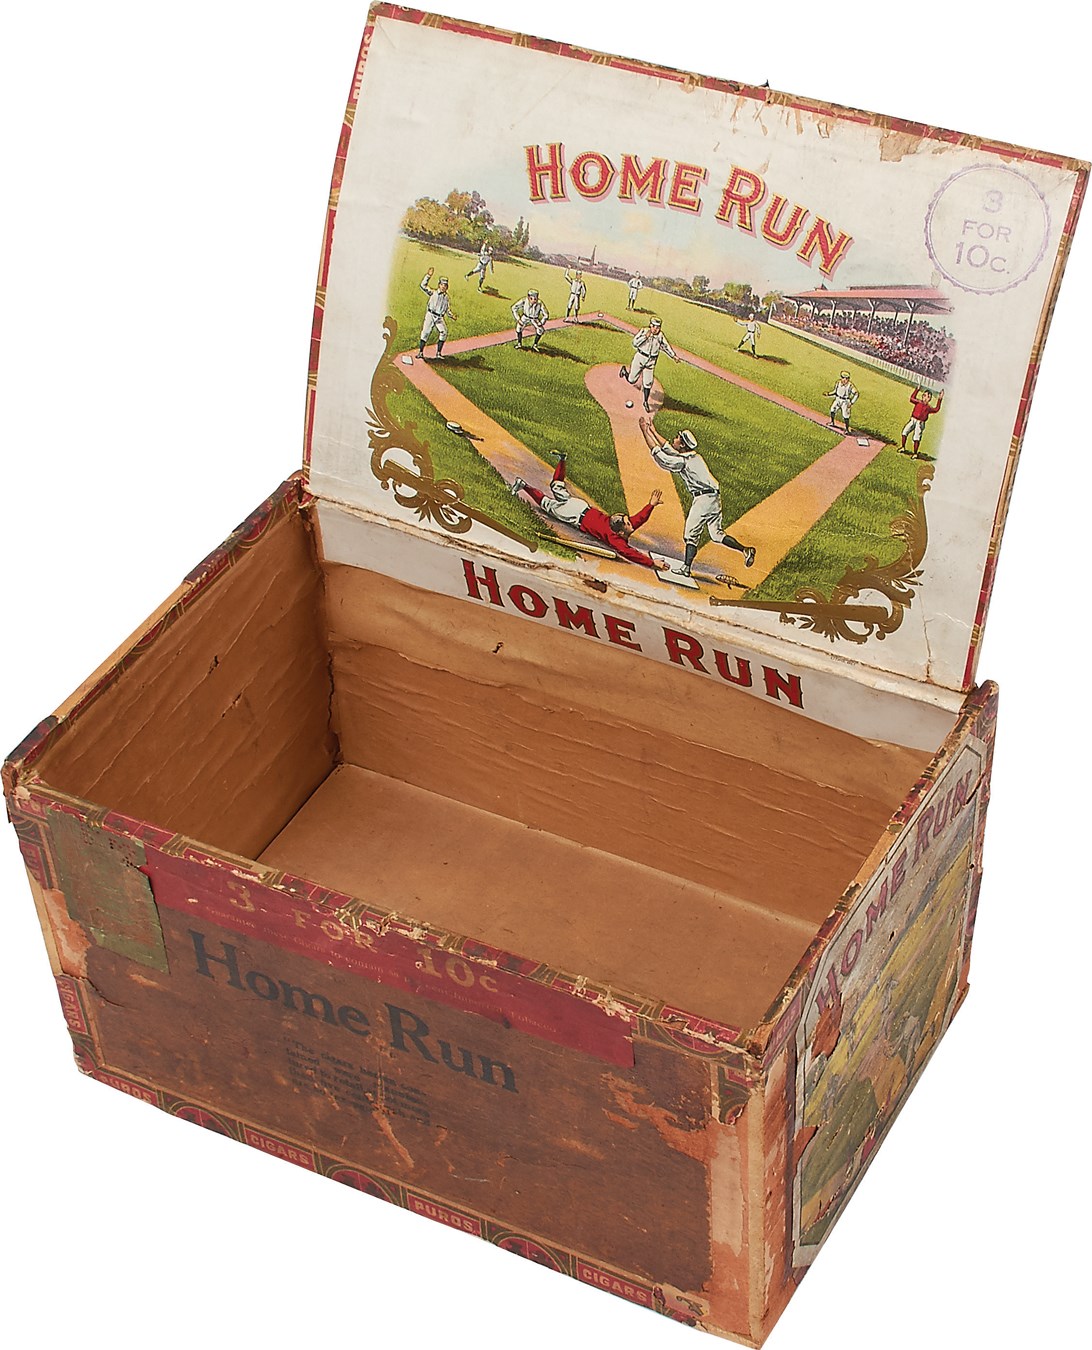 Classic 1905 "Home Run" Baseball Cigar Box - Only One Known